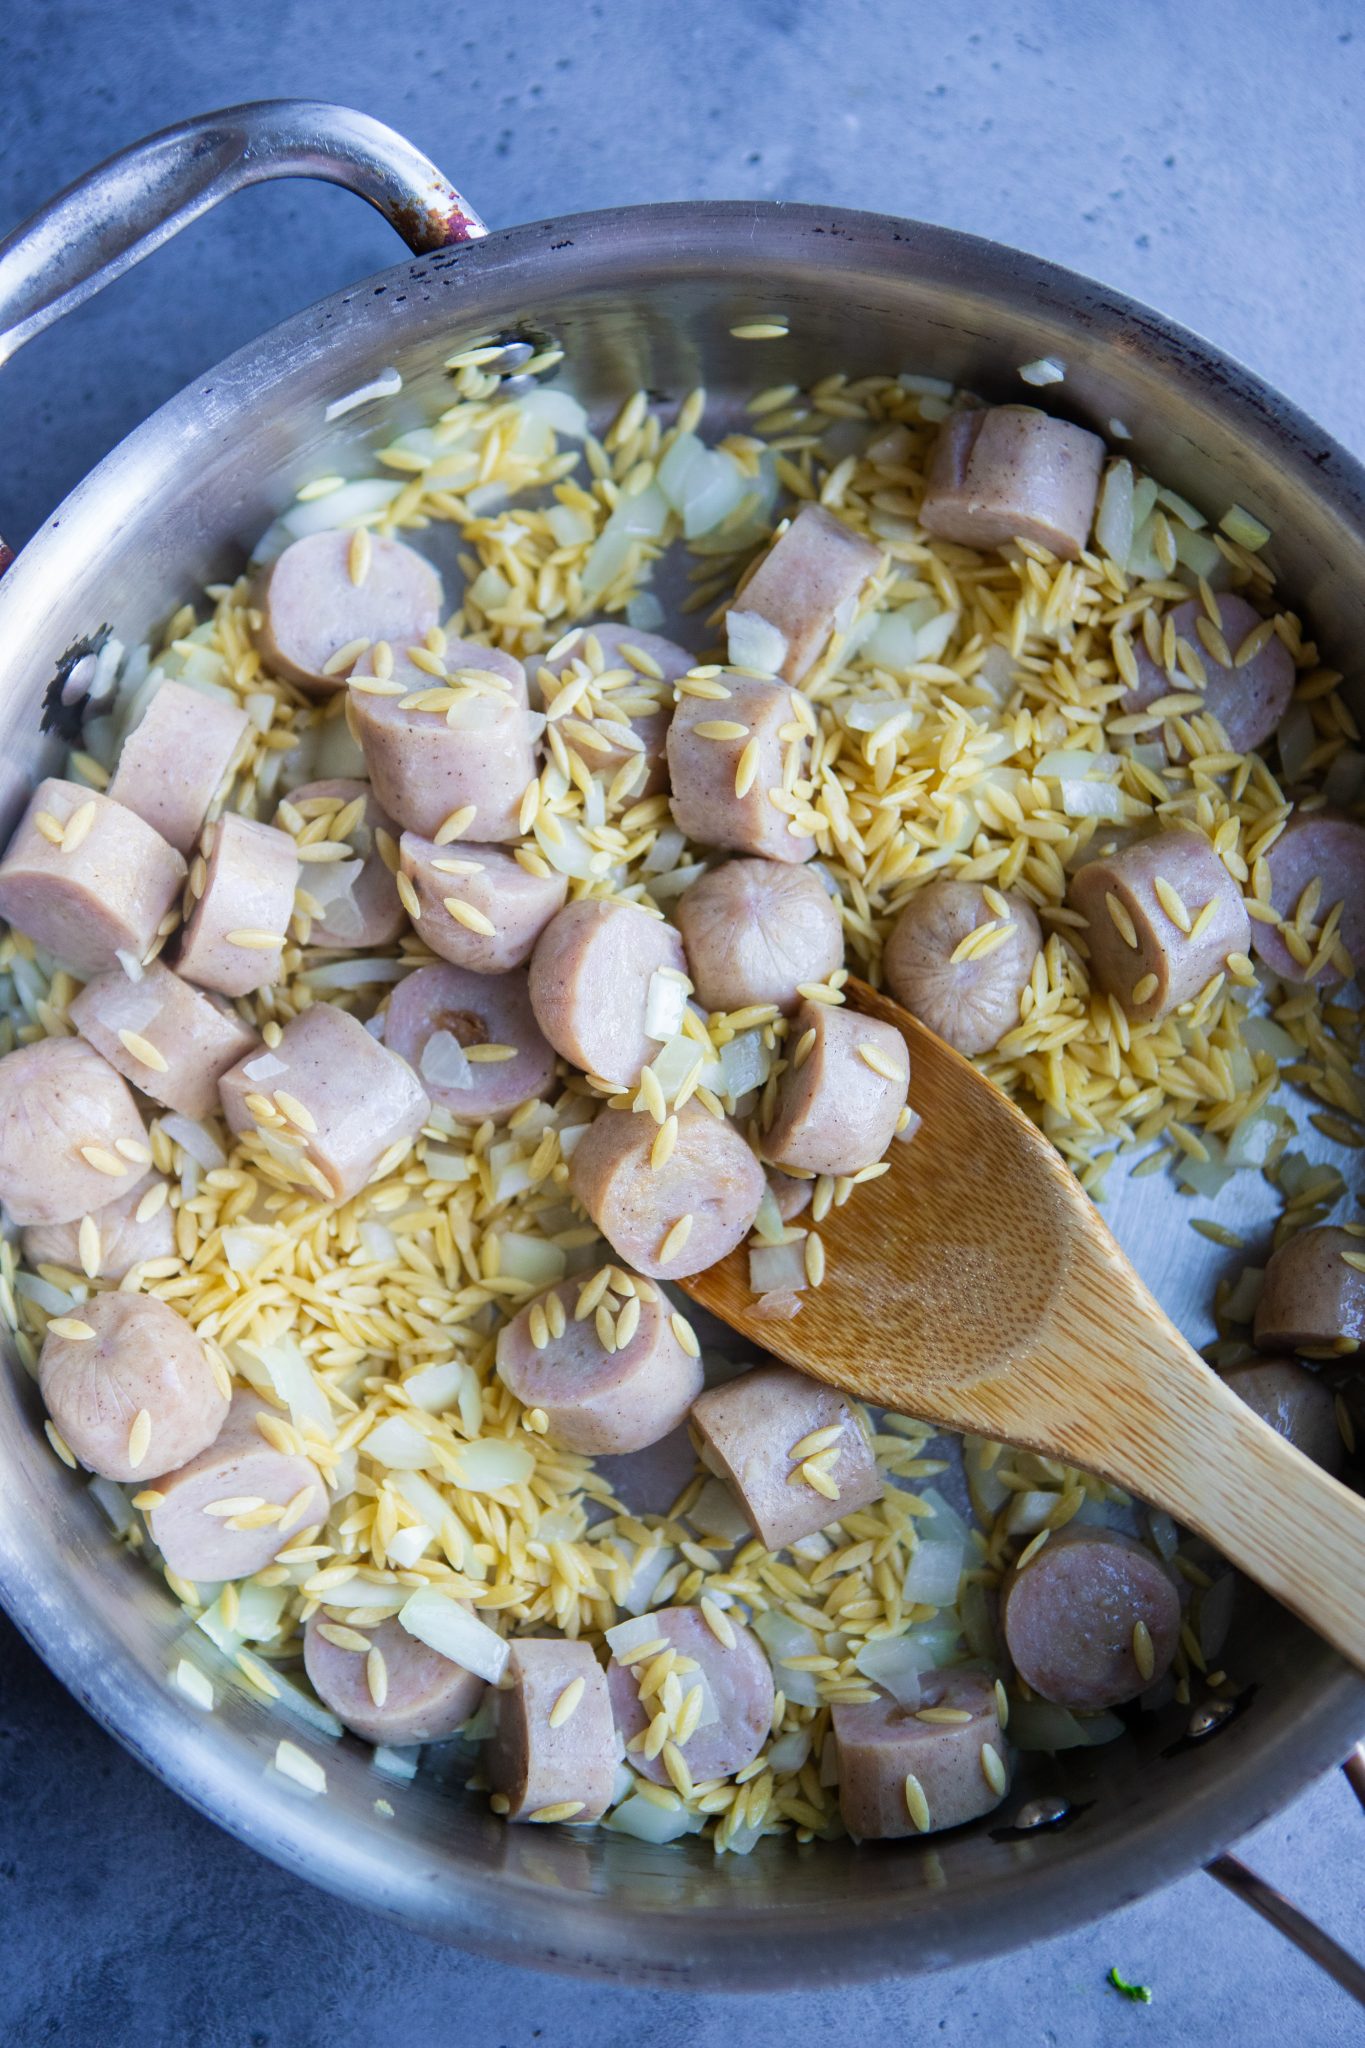 orzo diced onions and sliced sausage being sautéed in a large skillet